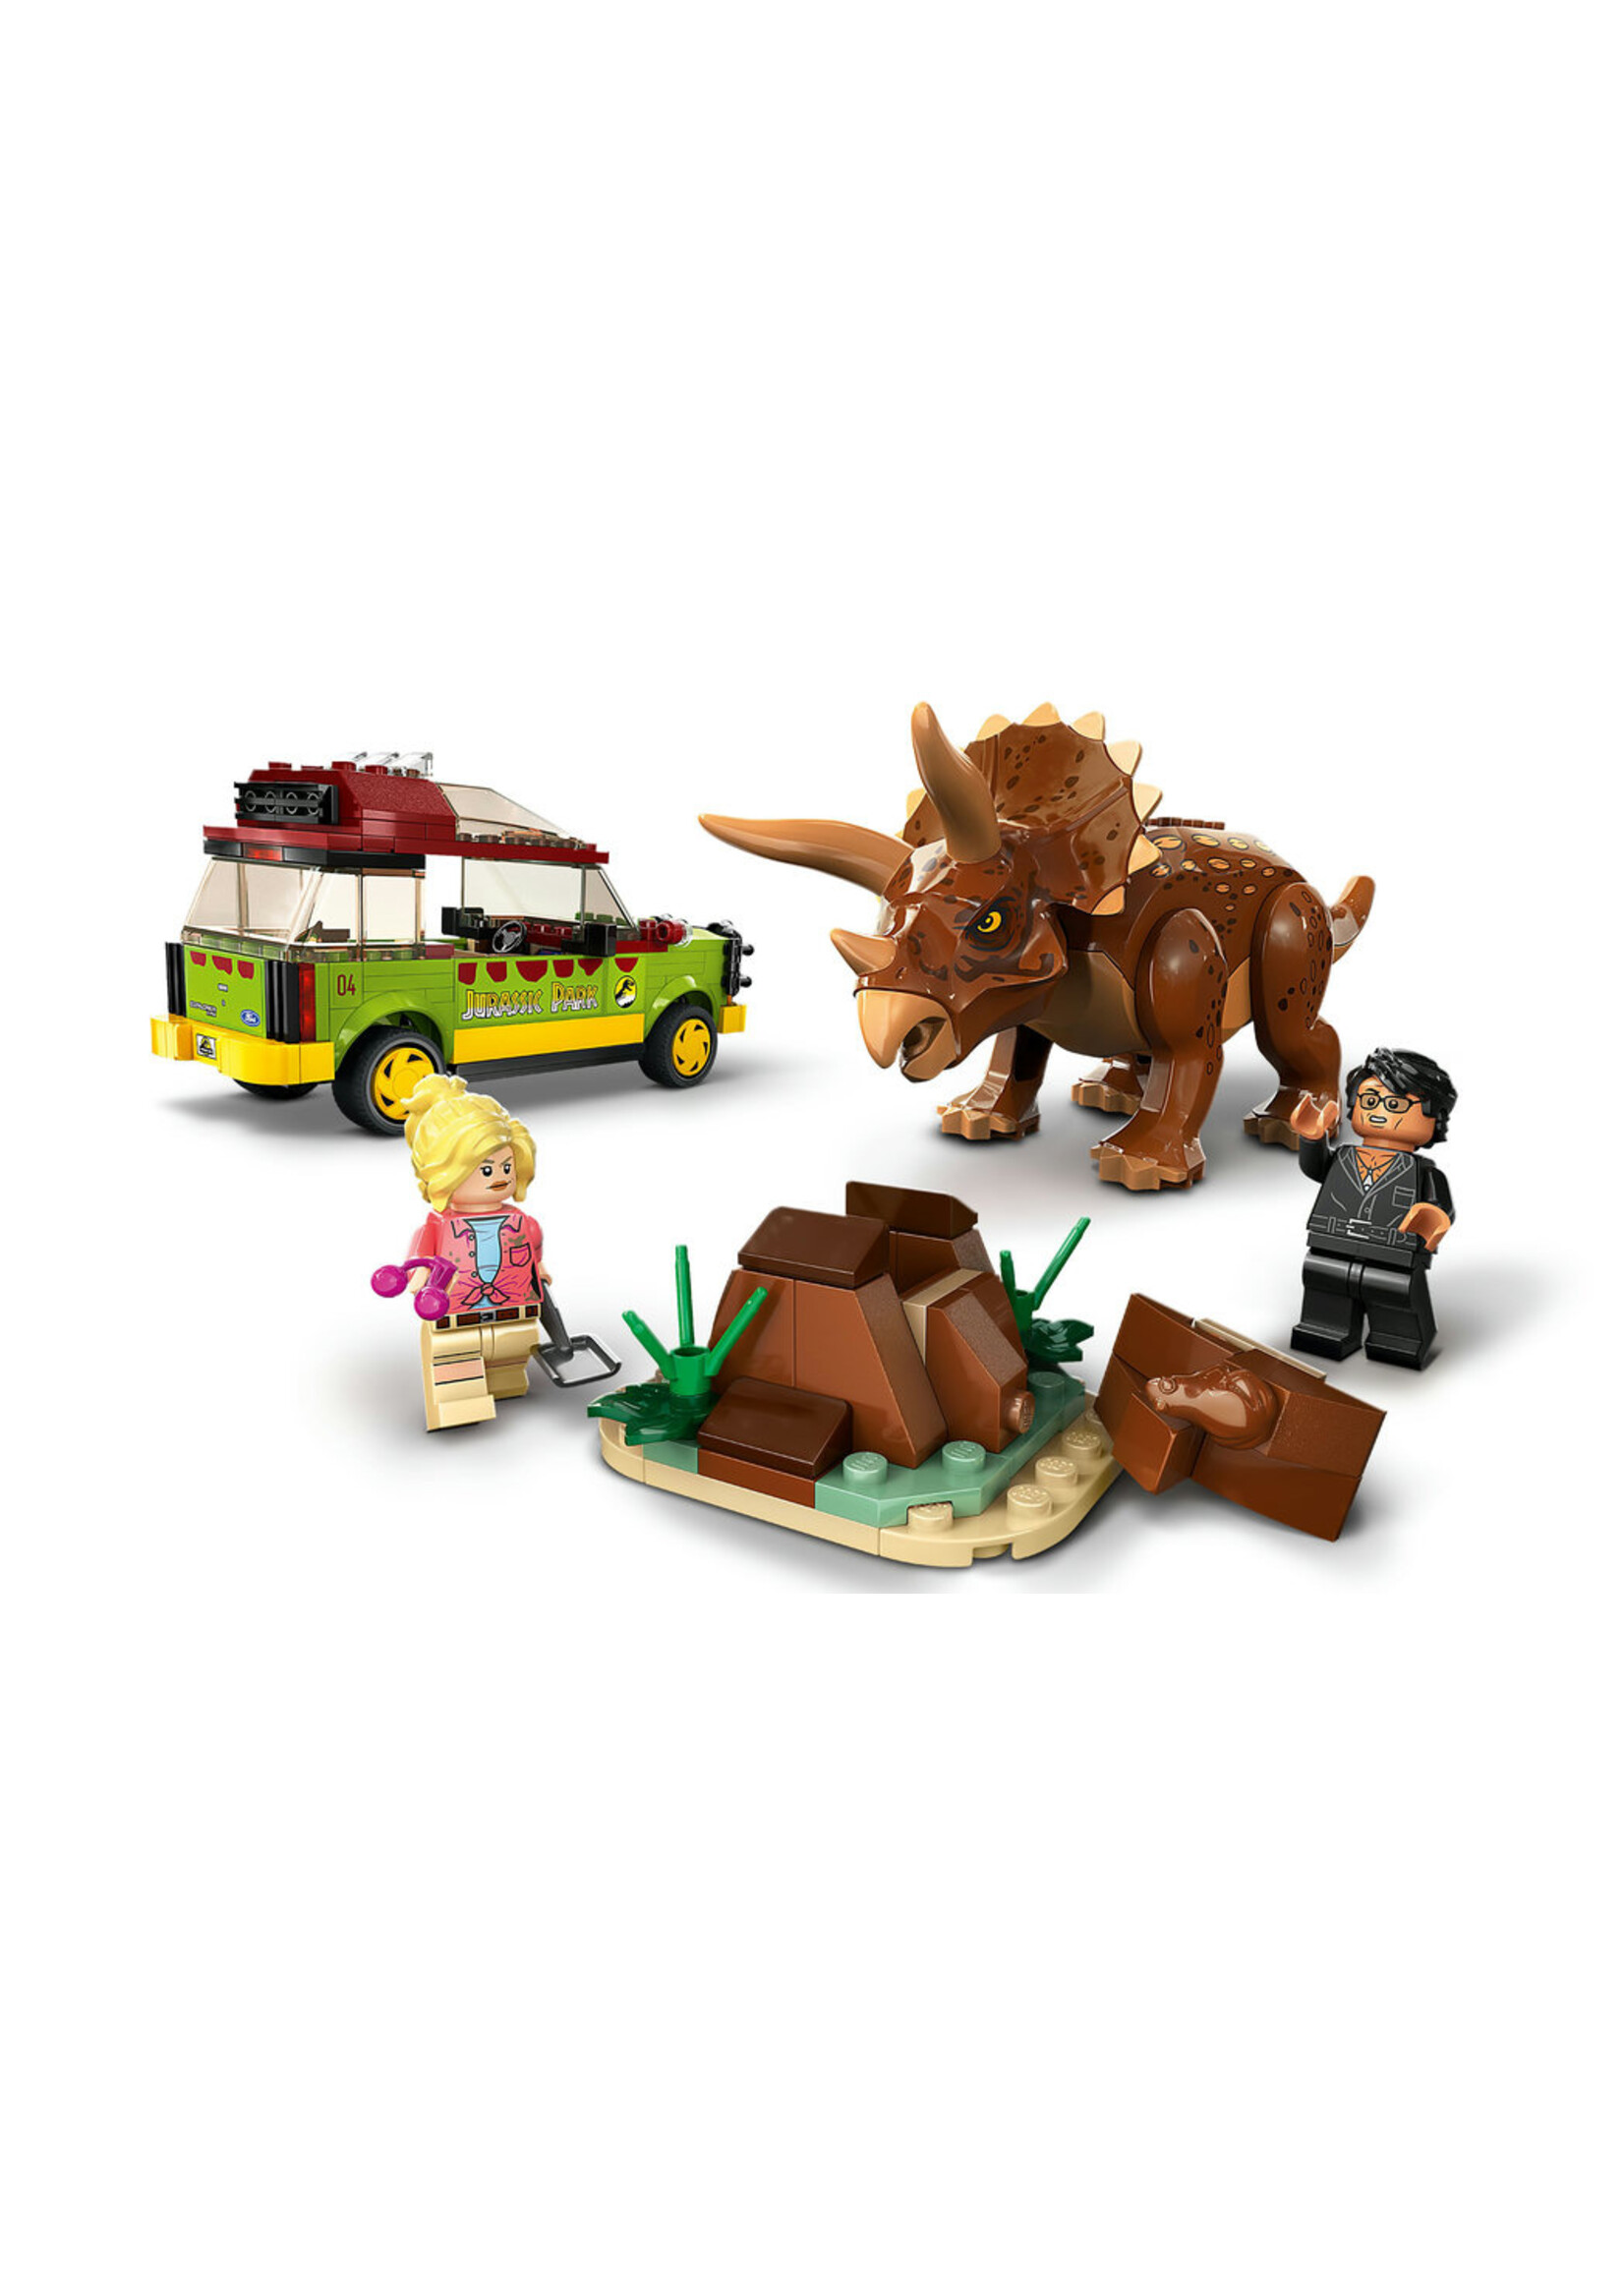 LEGO 76959 - Triceratops Research